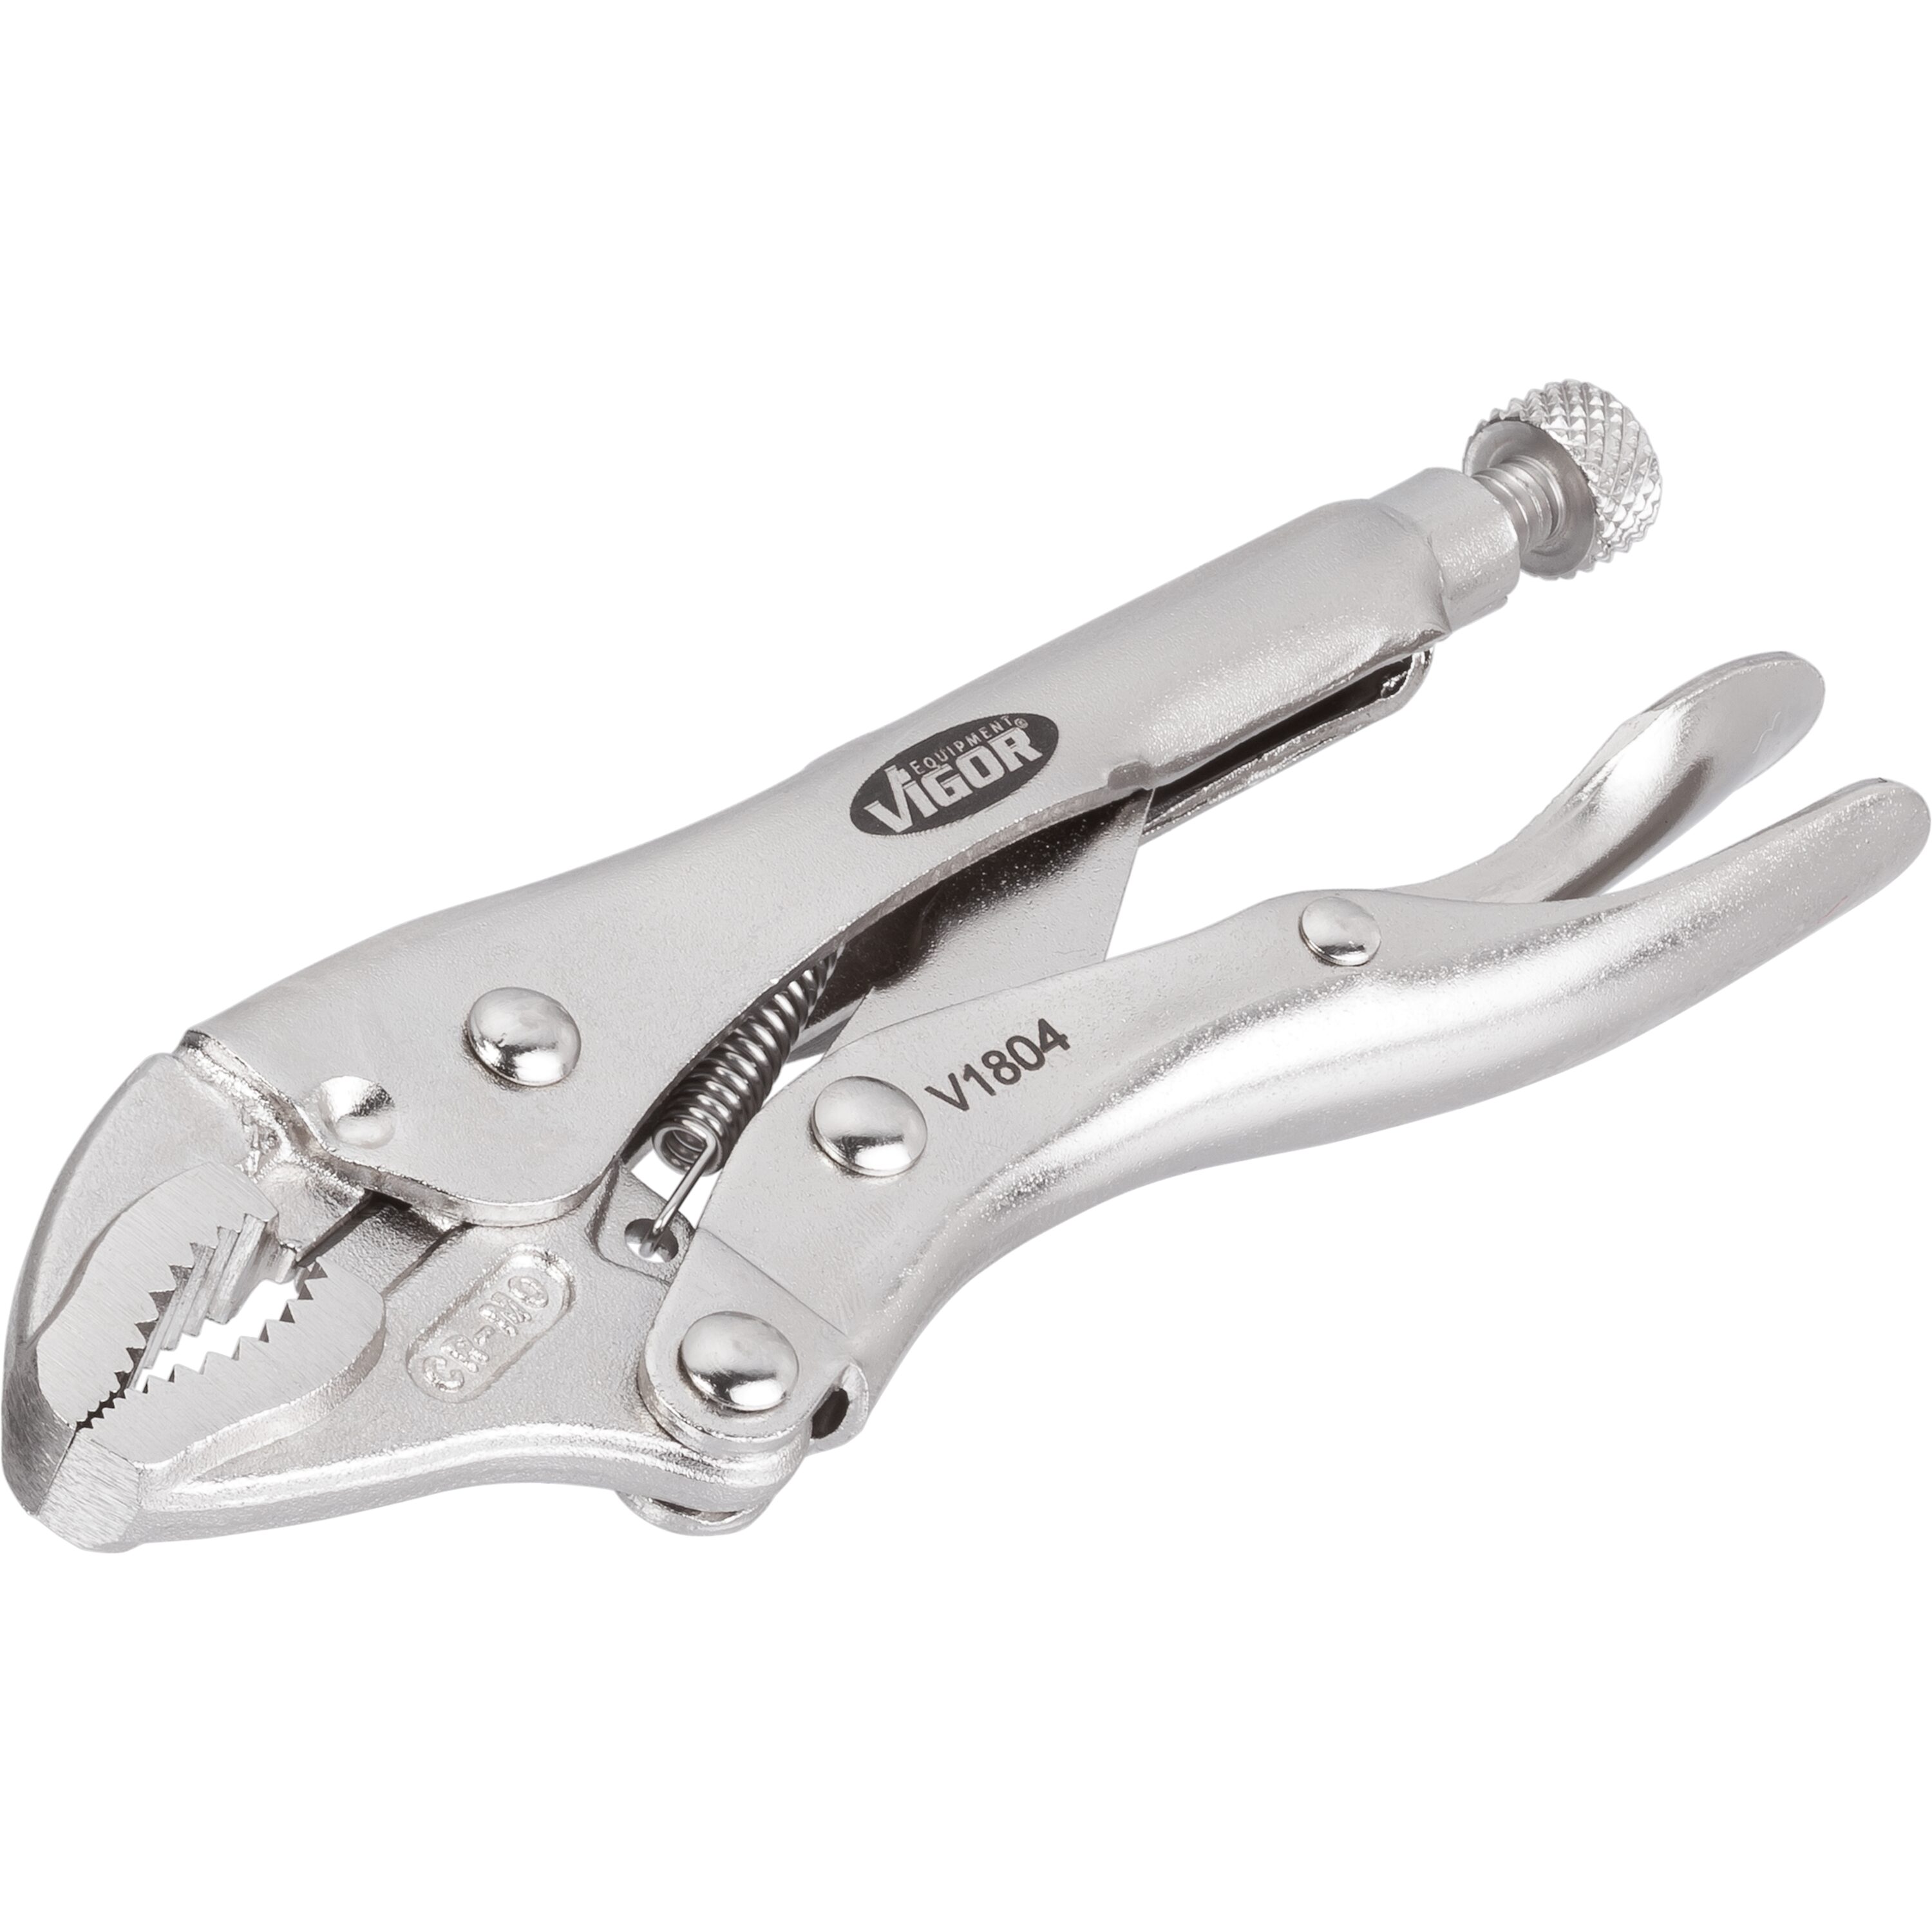 Grip pliers with long jaws | Greifzange | Pliers | Hand tools